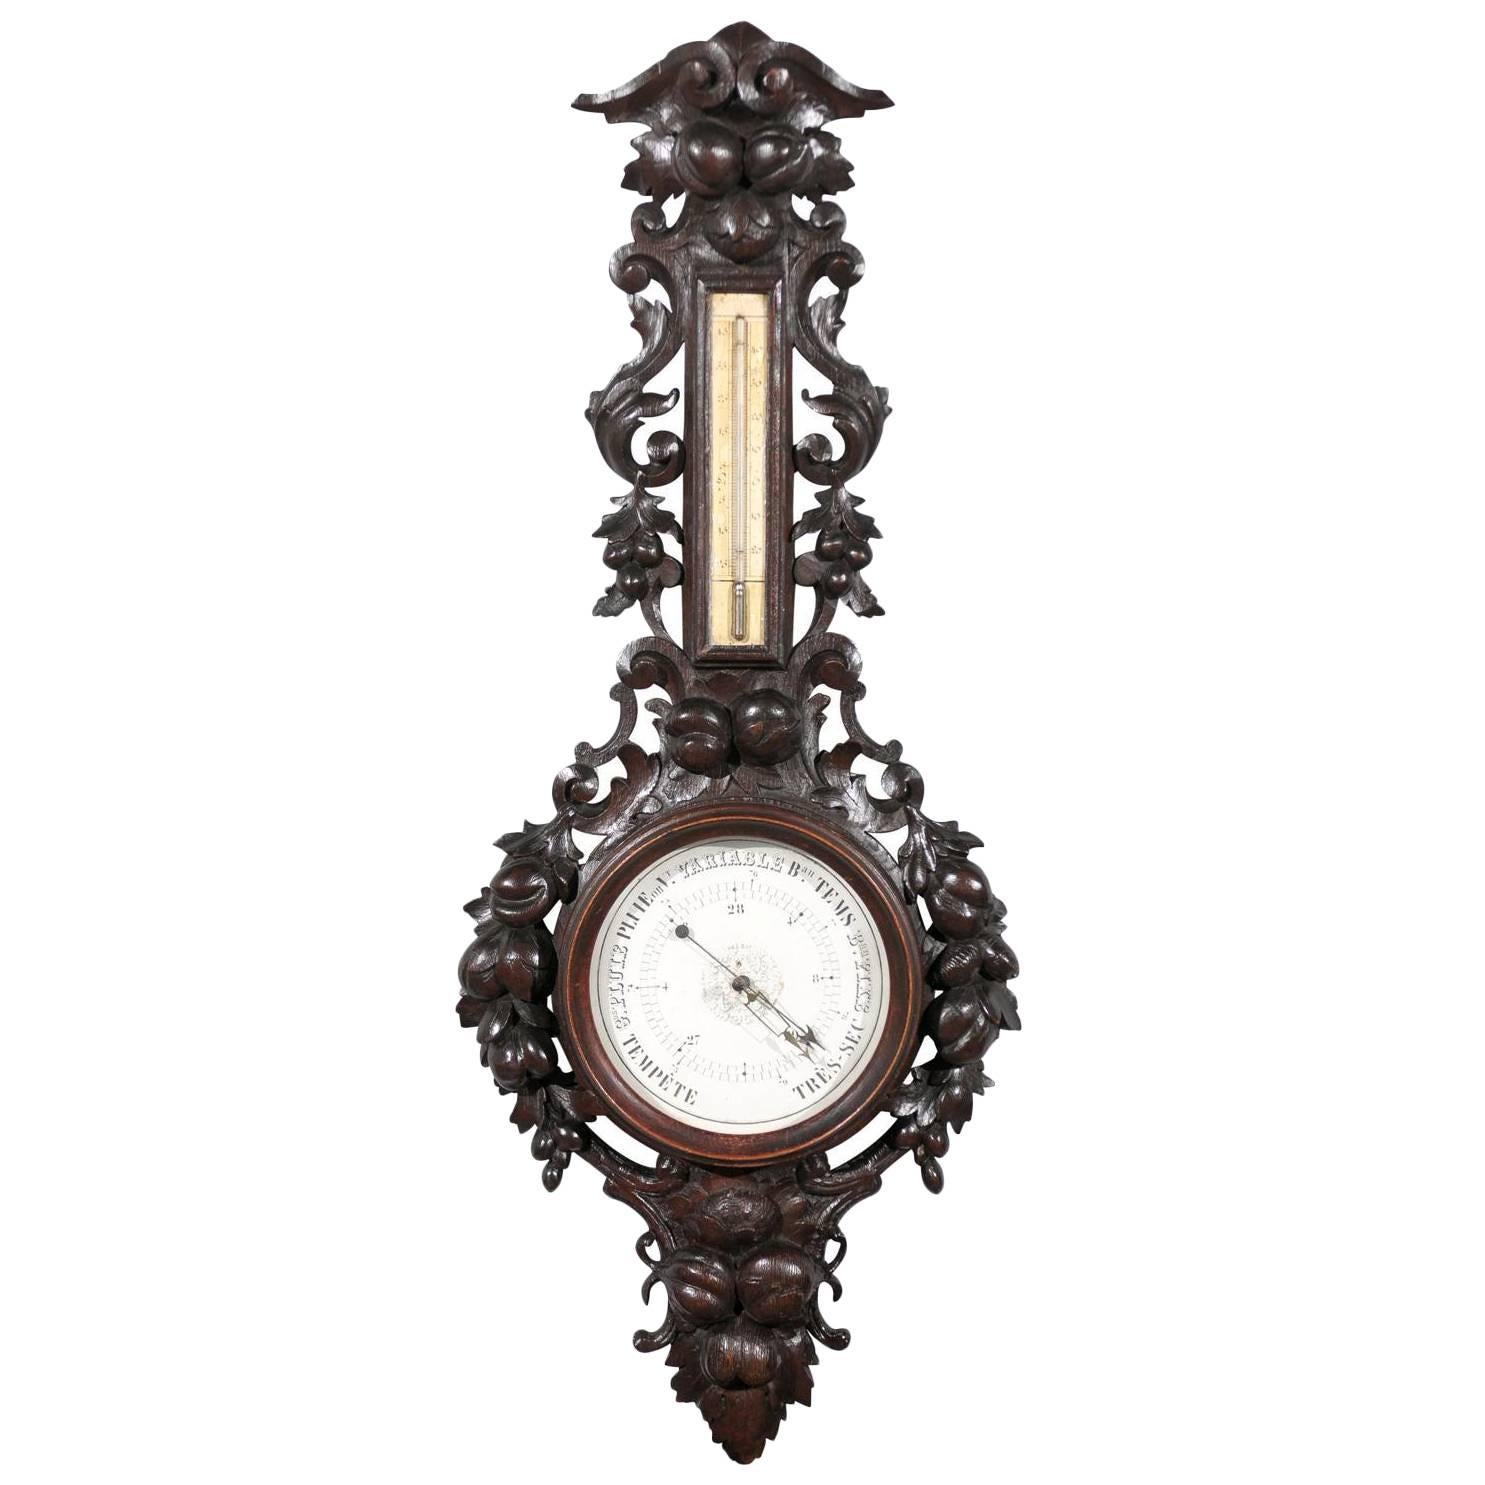 French Black Forest Hand-Carved Barometer from the Turn of the Century